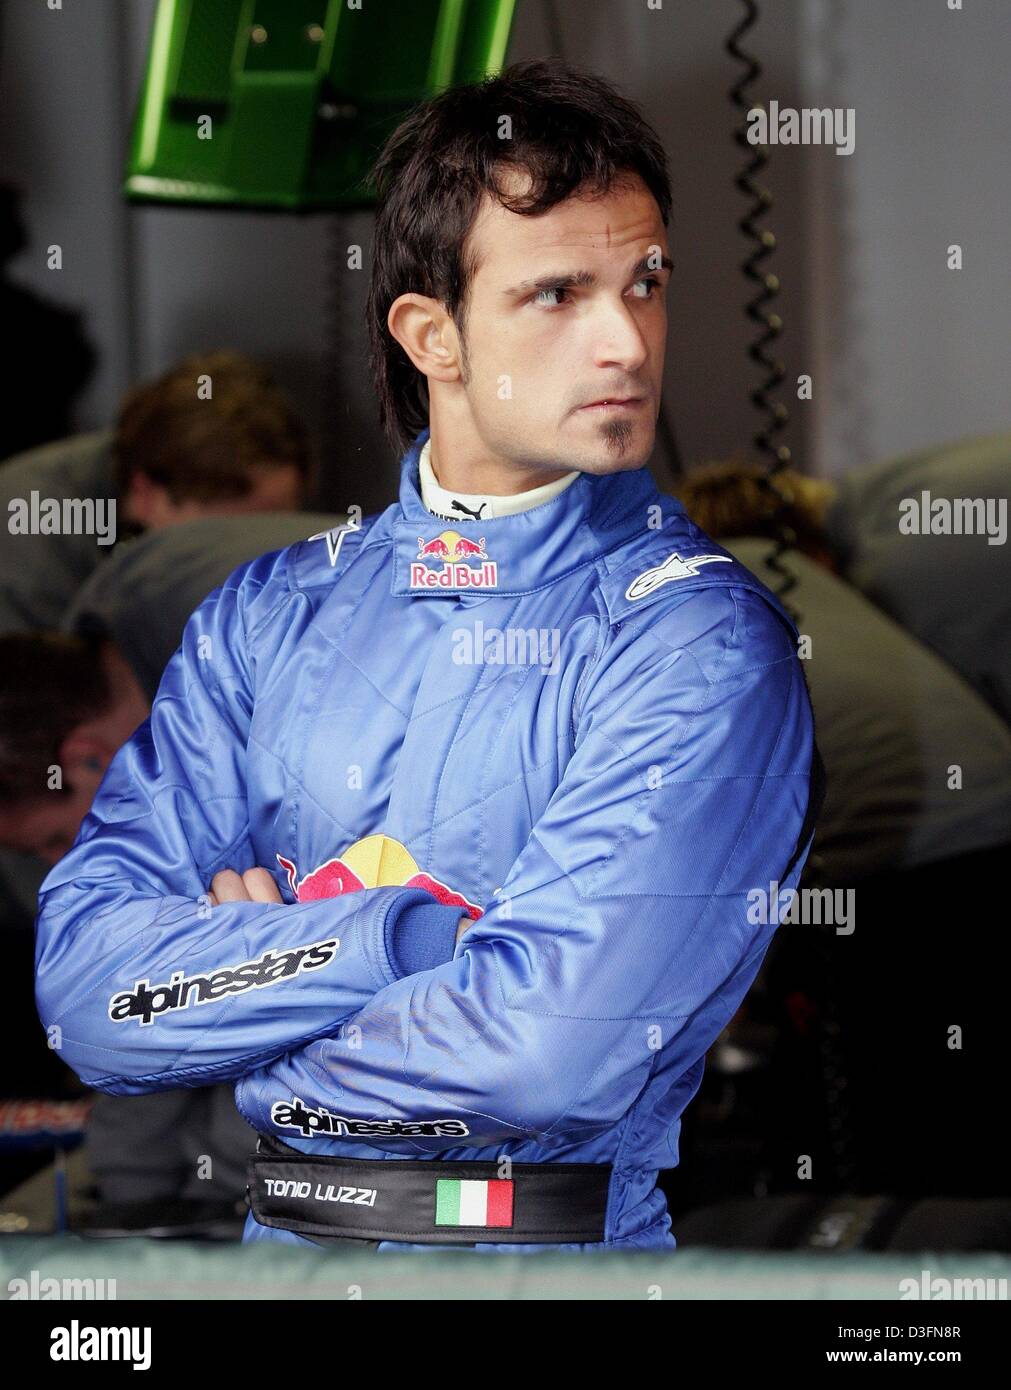 (dpa) - Italian Formula 1 pilot Vitantonio Liuzzi stands in the box of the new Red Bull F1 racing team at the Circuit de Catalunya race course in Barcelona, Spain, 24 November 2004. The new team, which emerged from the Jaguar team, will be part of Formula One in 2005. Stock Photo